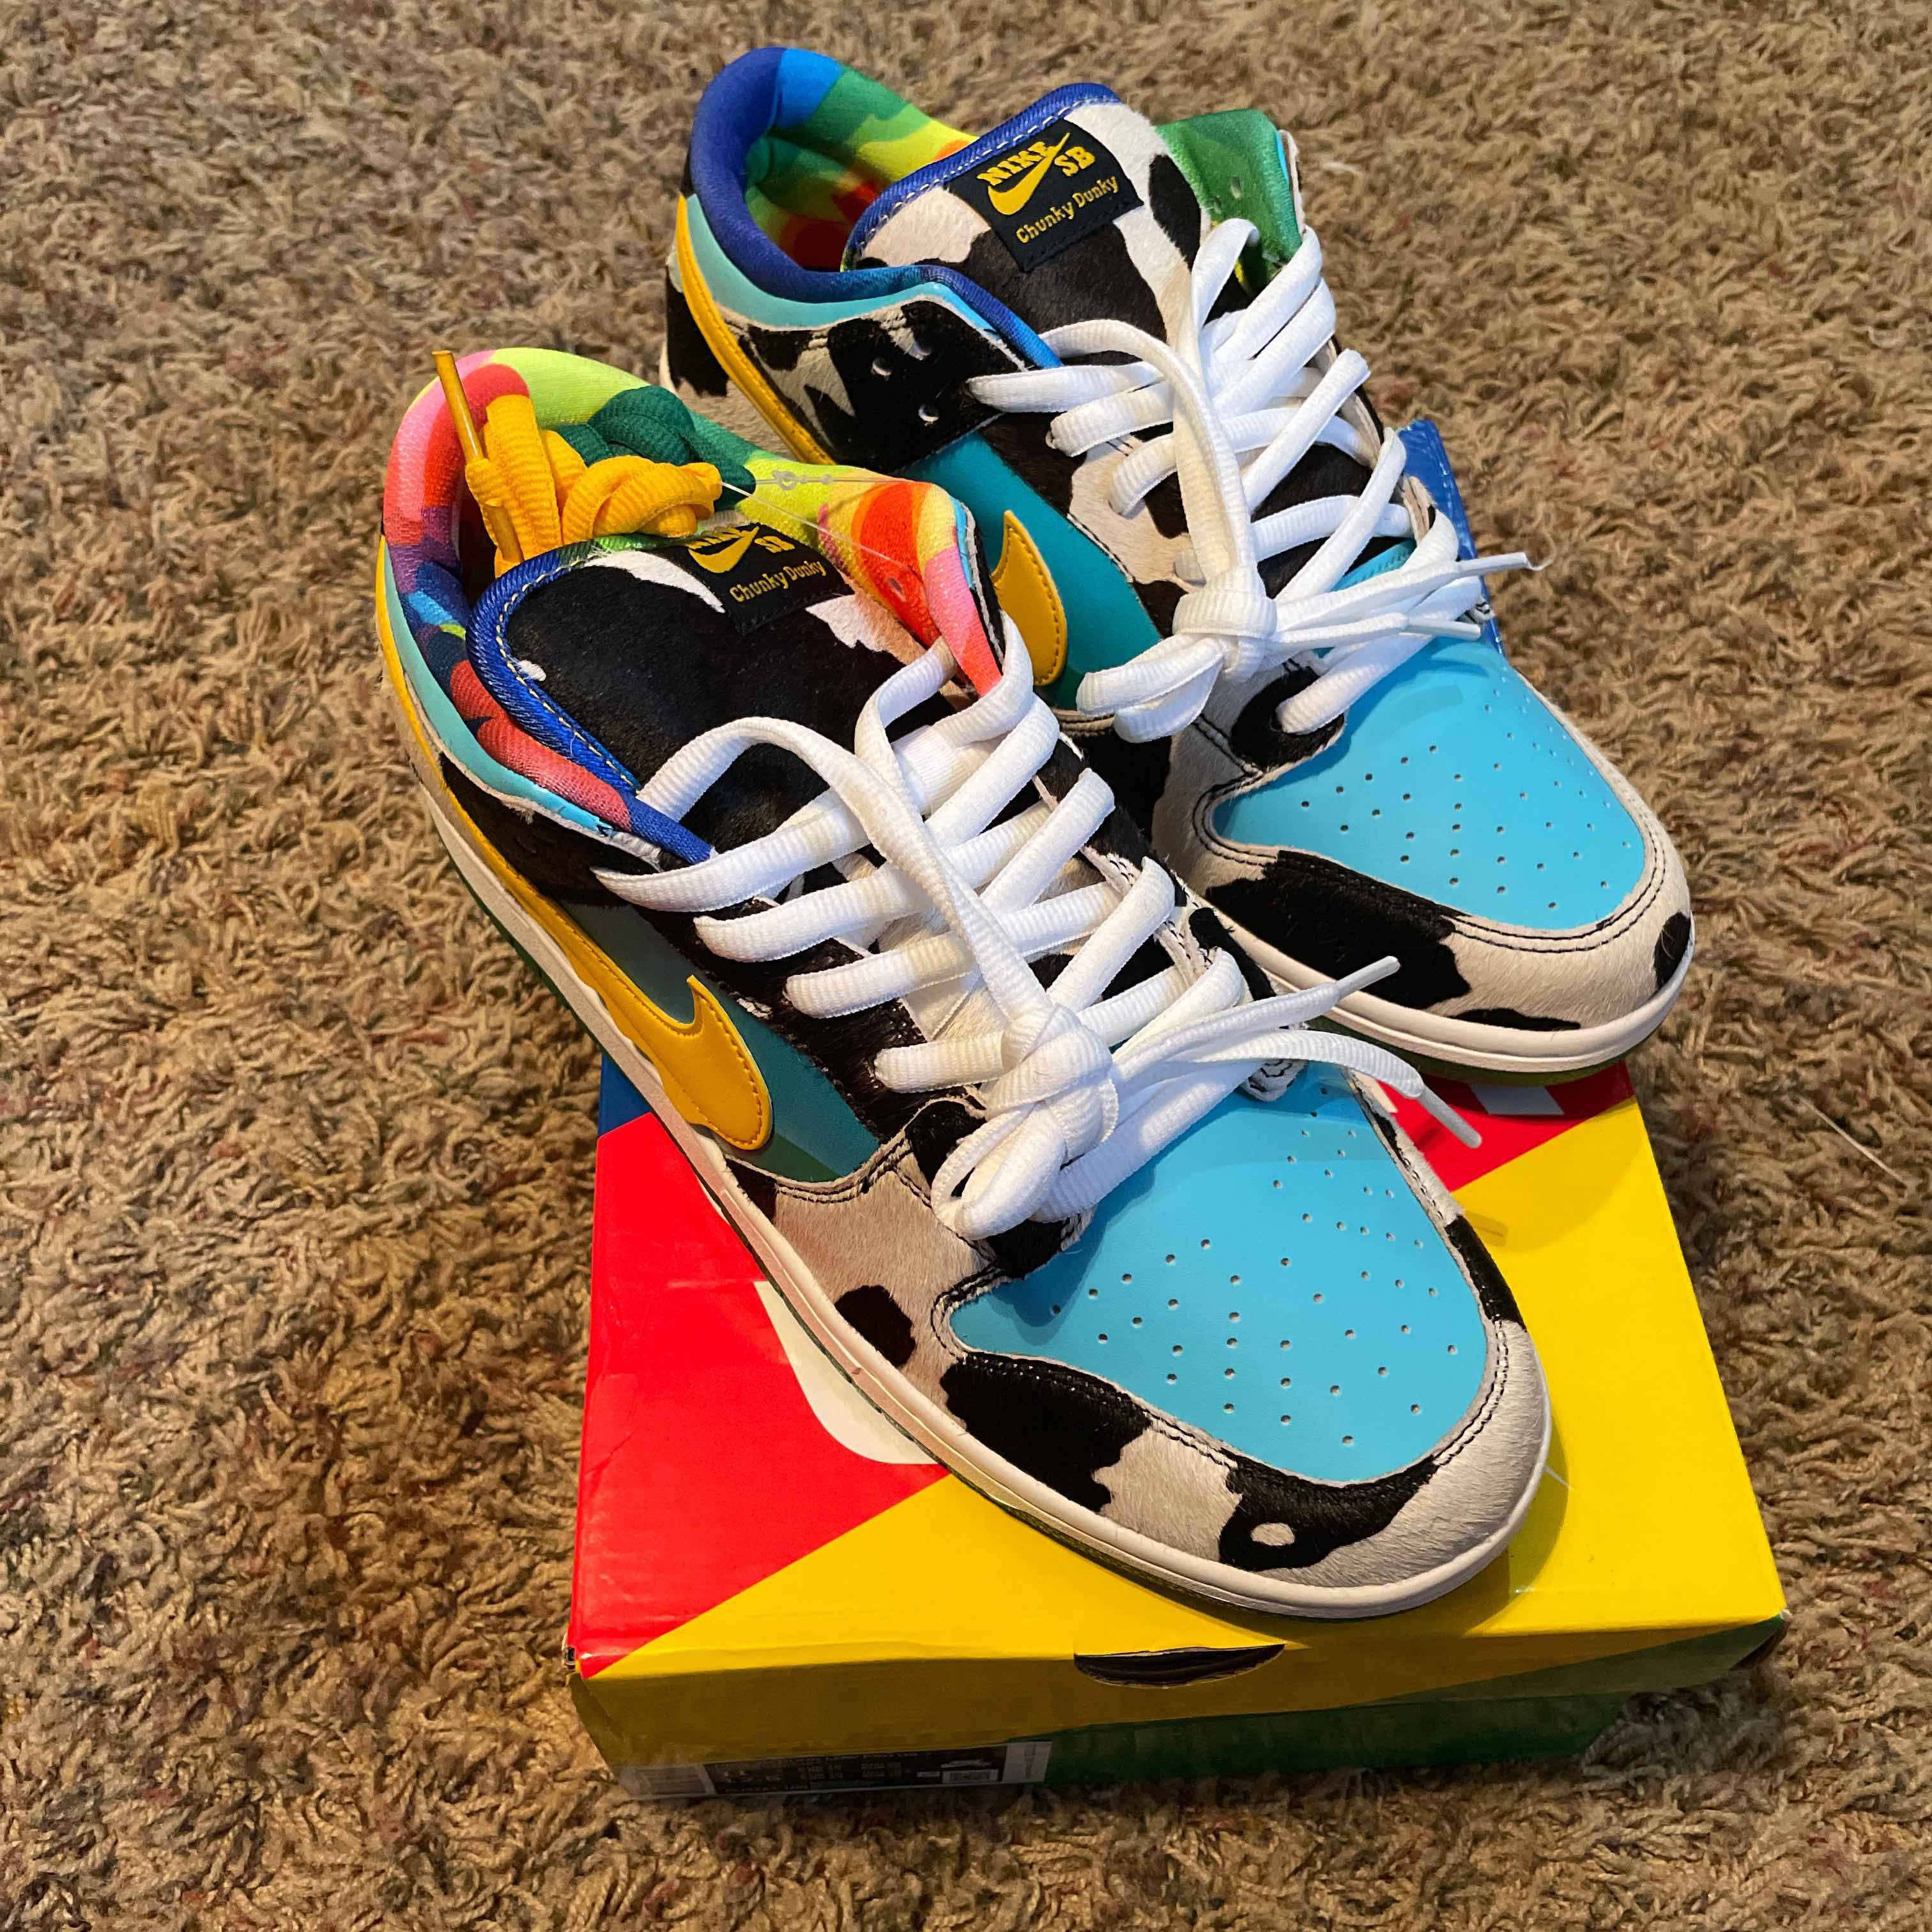 Ben & Jerry's x Dunk Low SB 'Chunky Dunky' Special Ice Cream Box - Nike ...